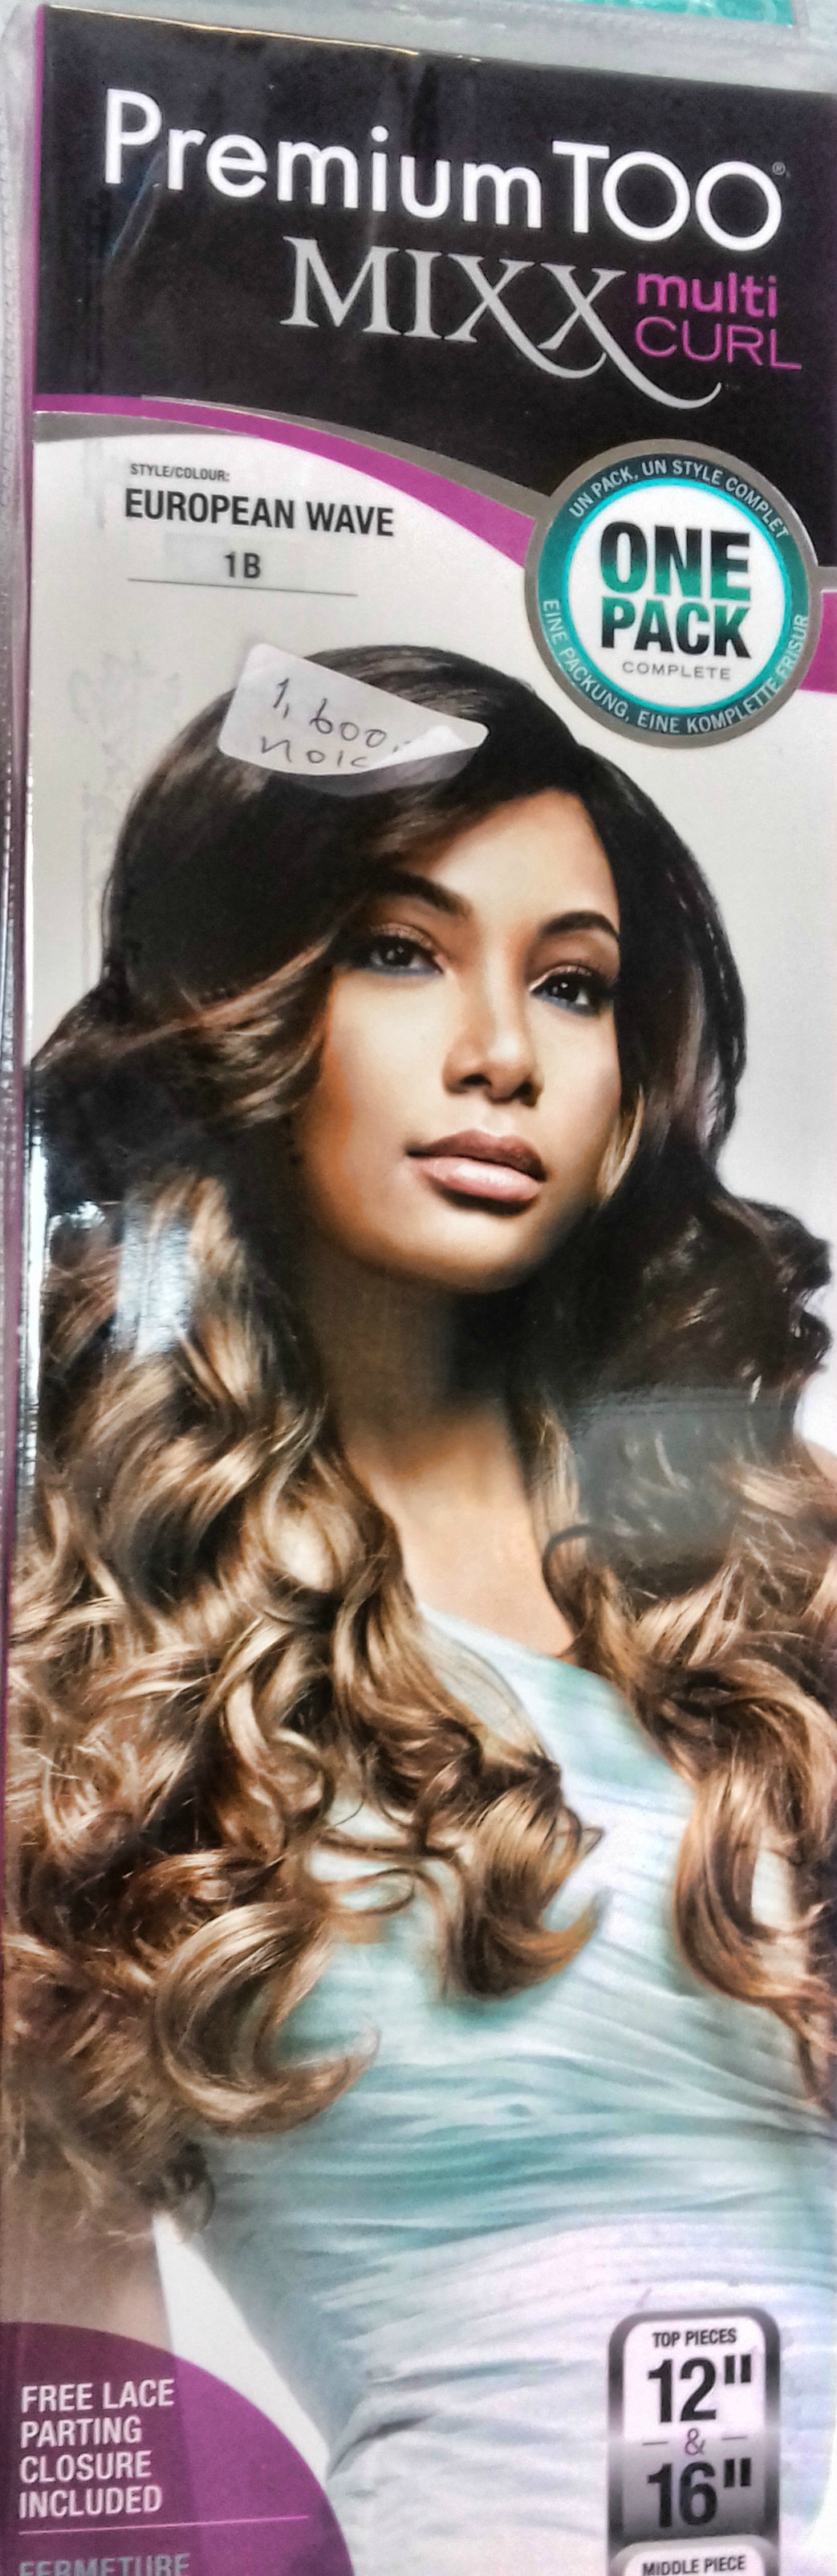 Premium too mixx wig and lace